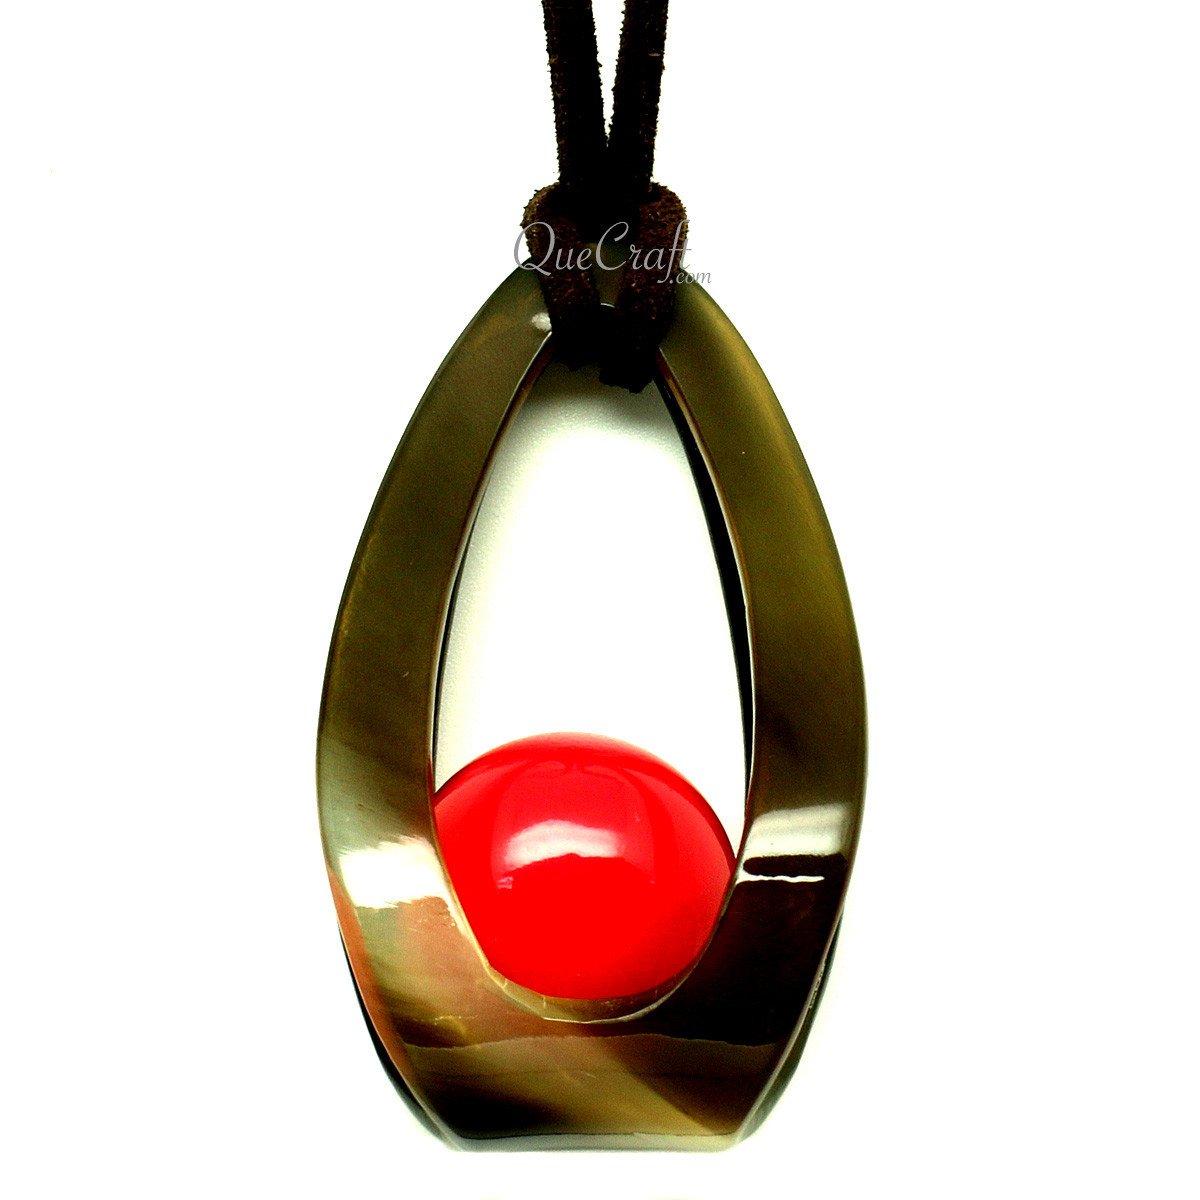 Horn & Lacquer Pendant #12910 - HORN JEWELRY